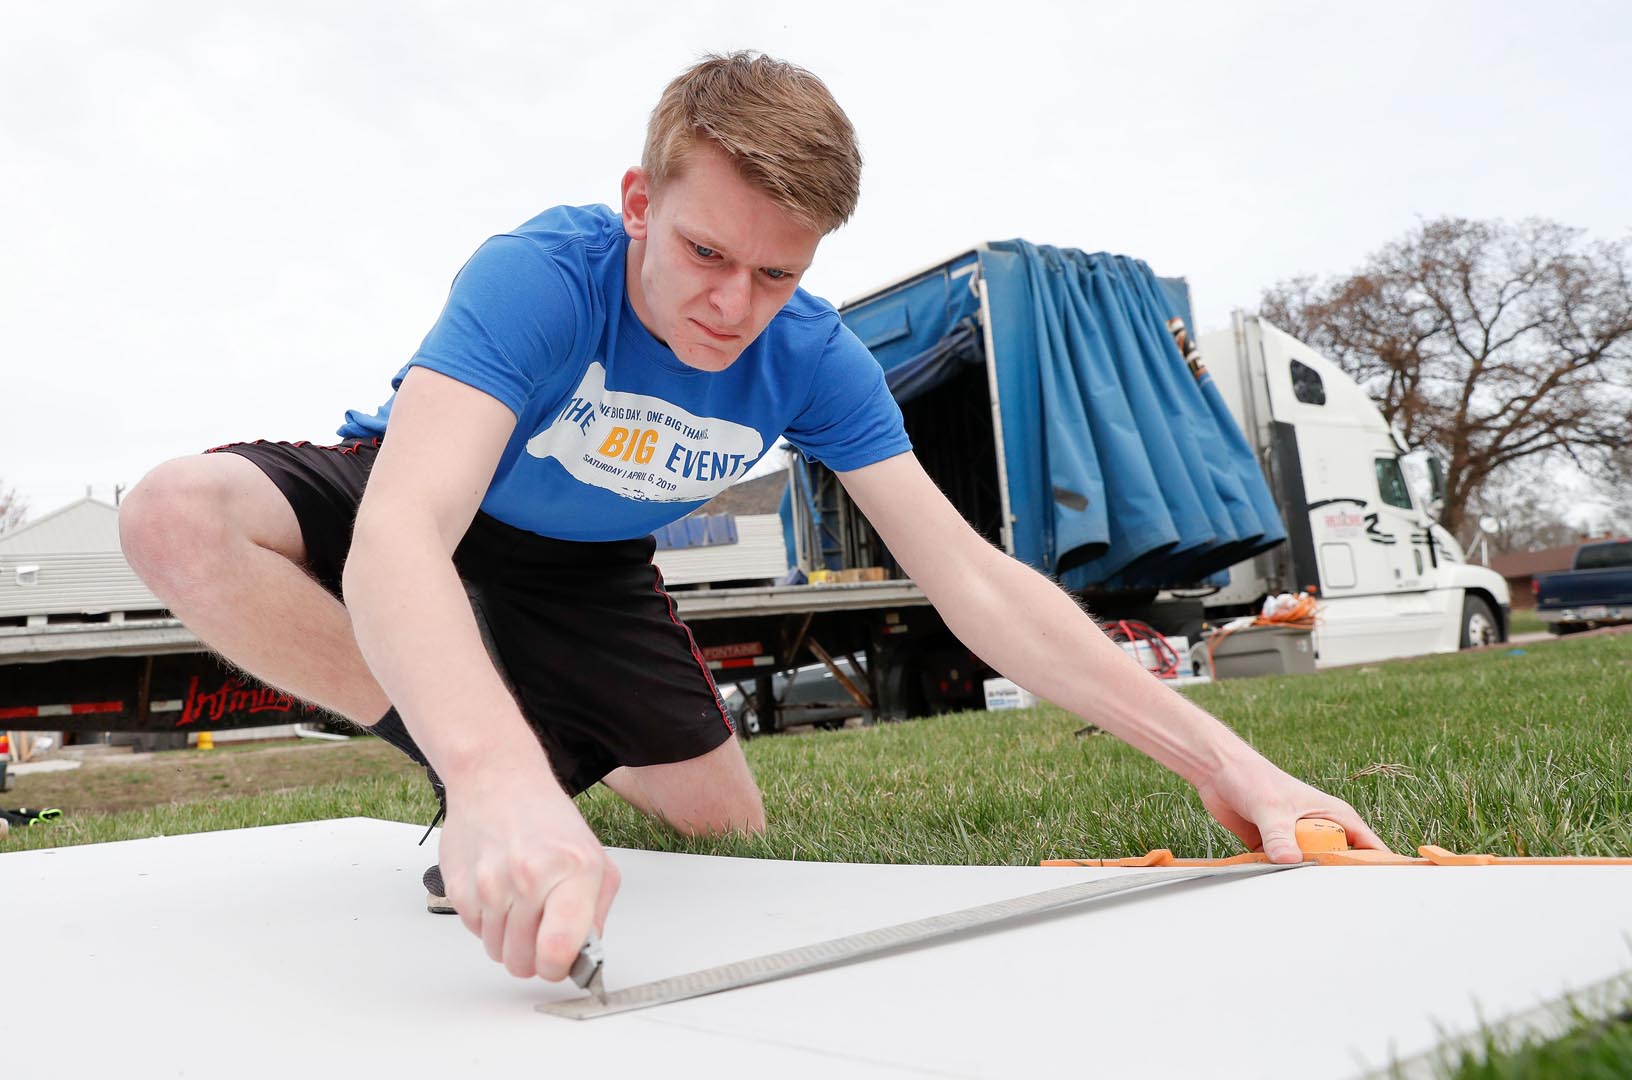 Connor Rockwell of Norfolk cuts Sheetrock Saturday while helping with flood recovery efforts in Gibbon. Rockwell was among 500 University of Nebraska at Kearney students volunteering in Kearney and area communities as part of UNK’s The Big Event. (Photo by Corbey R. Dorsey, UNK Communications)